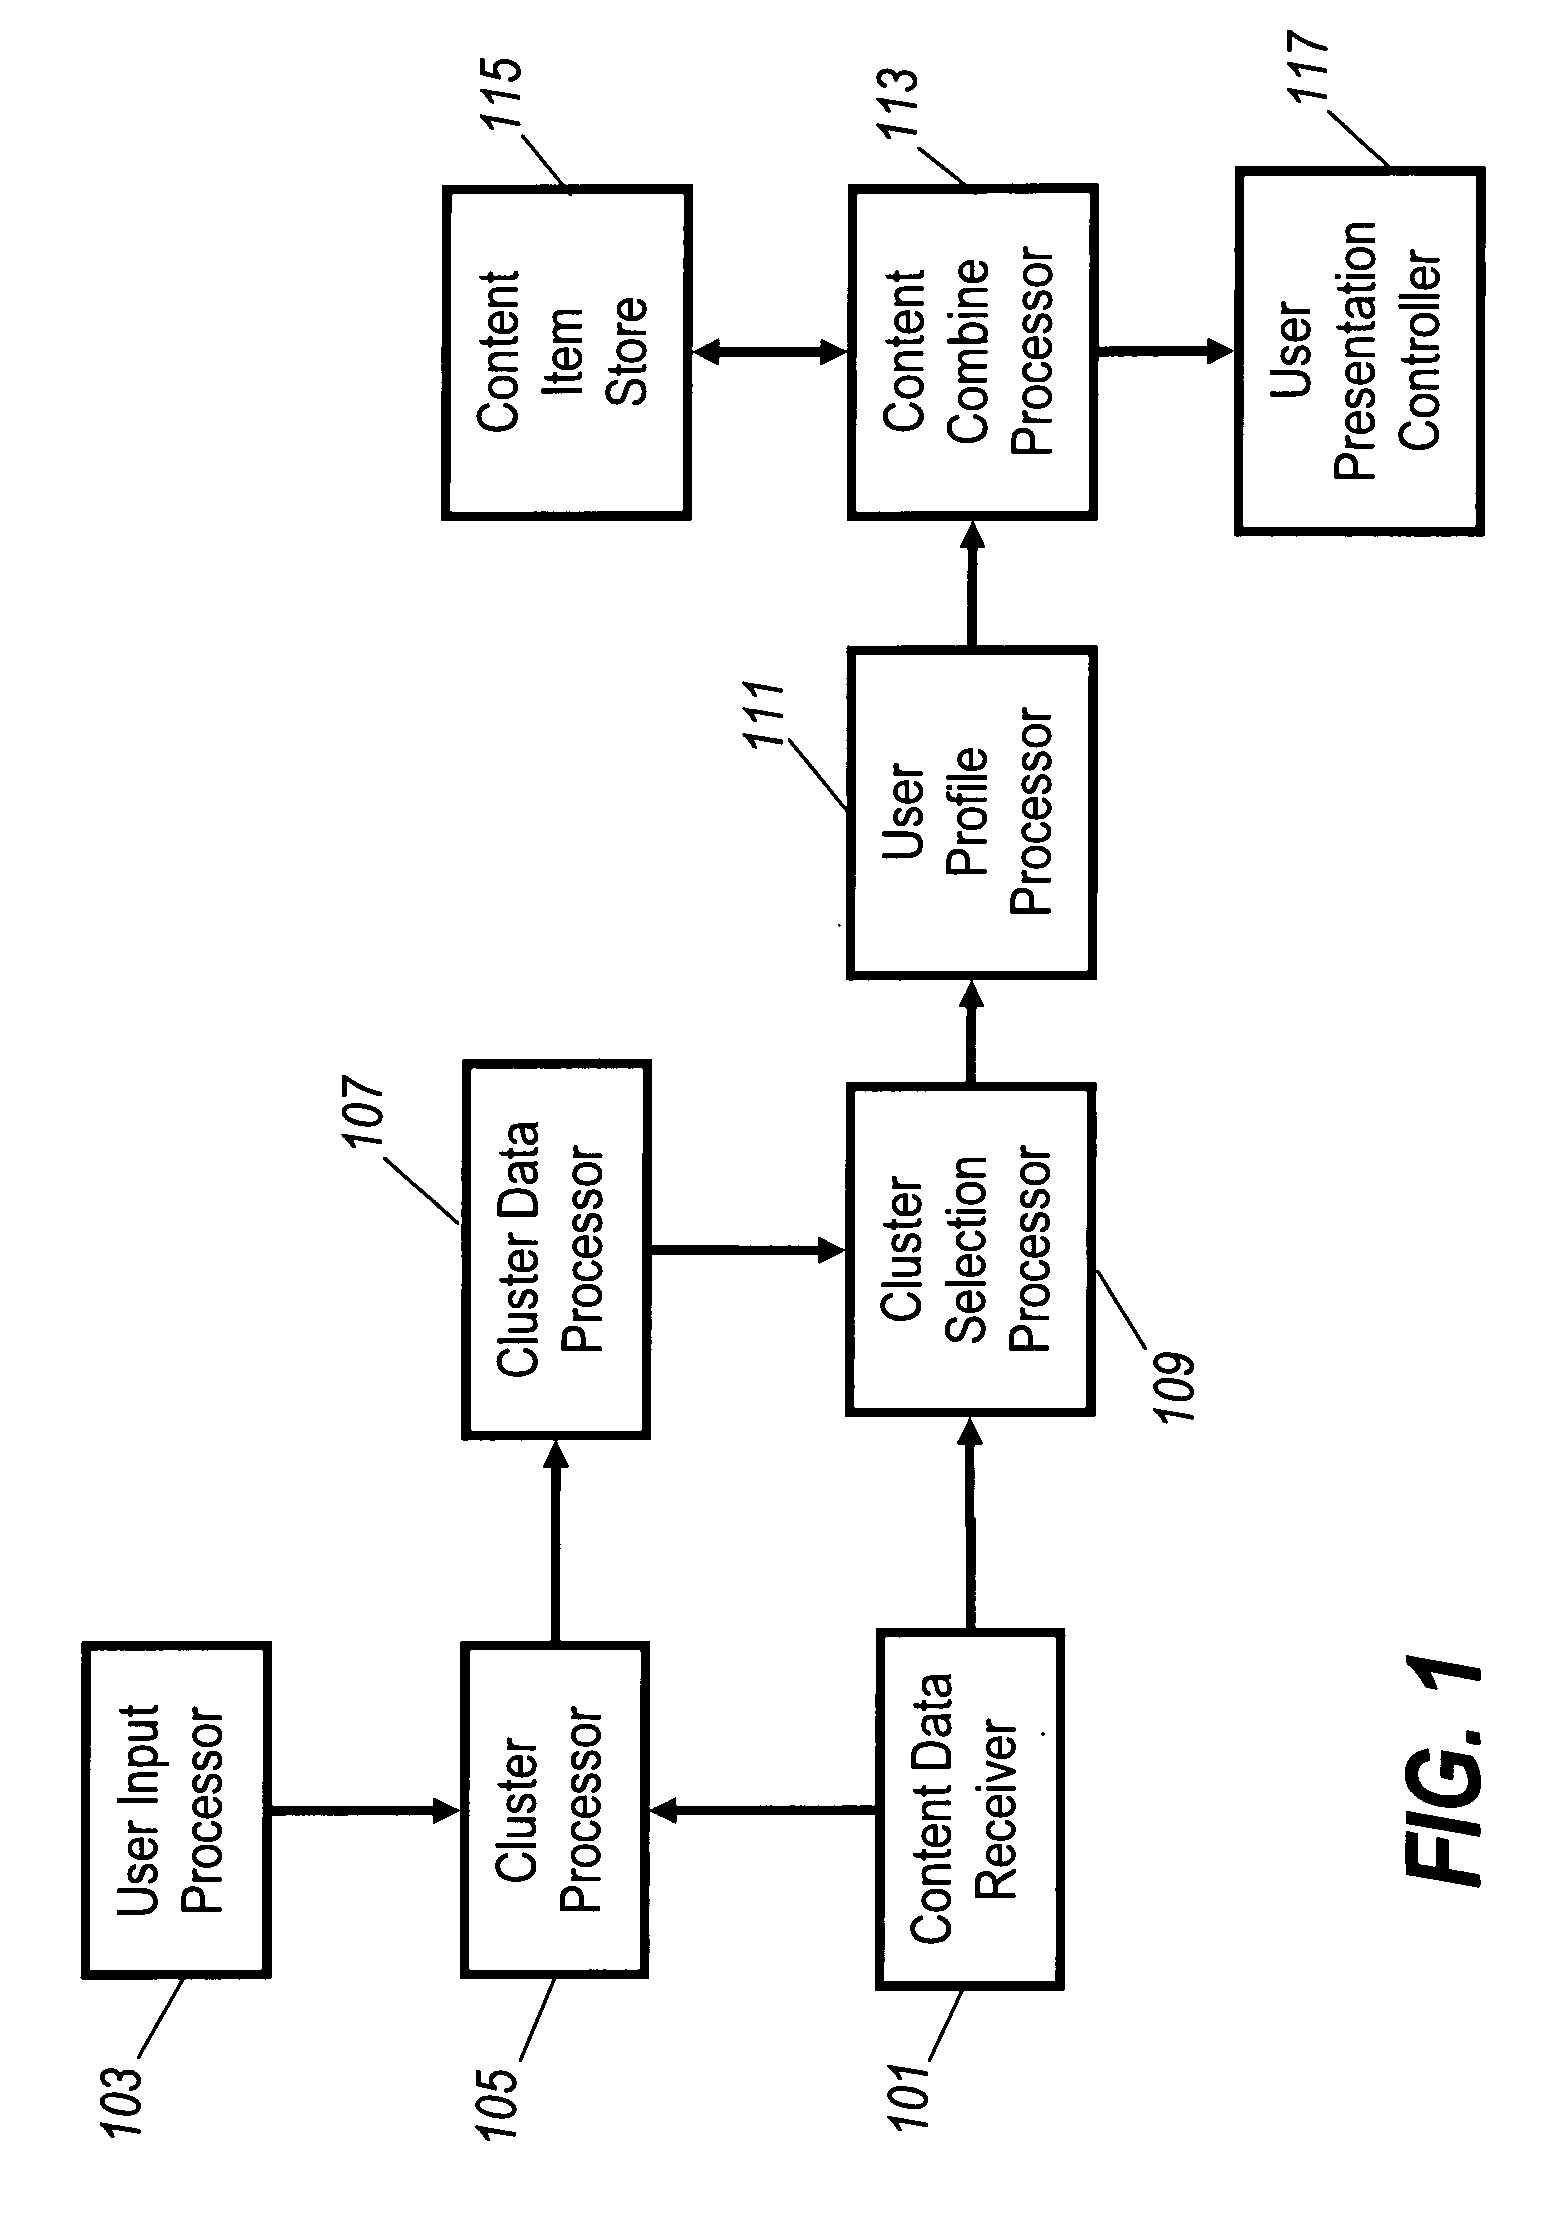 Method and apparatus for generating a user profile